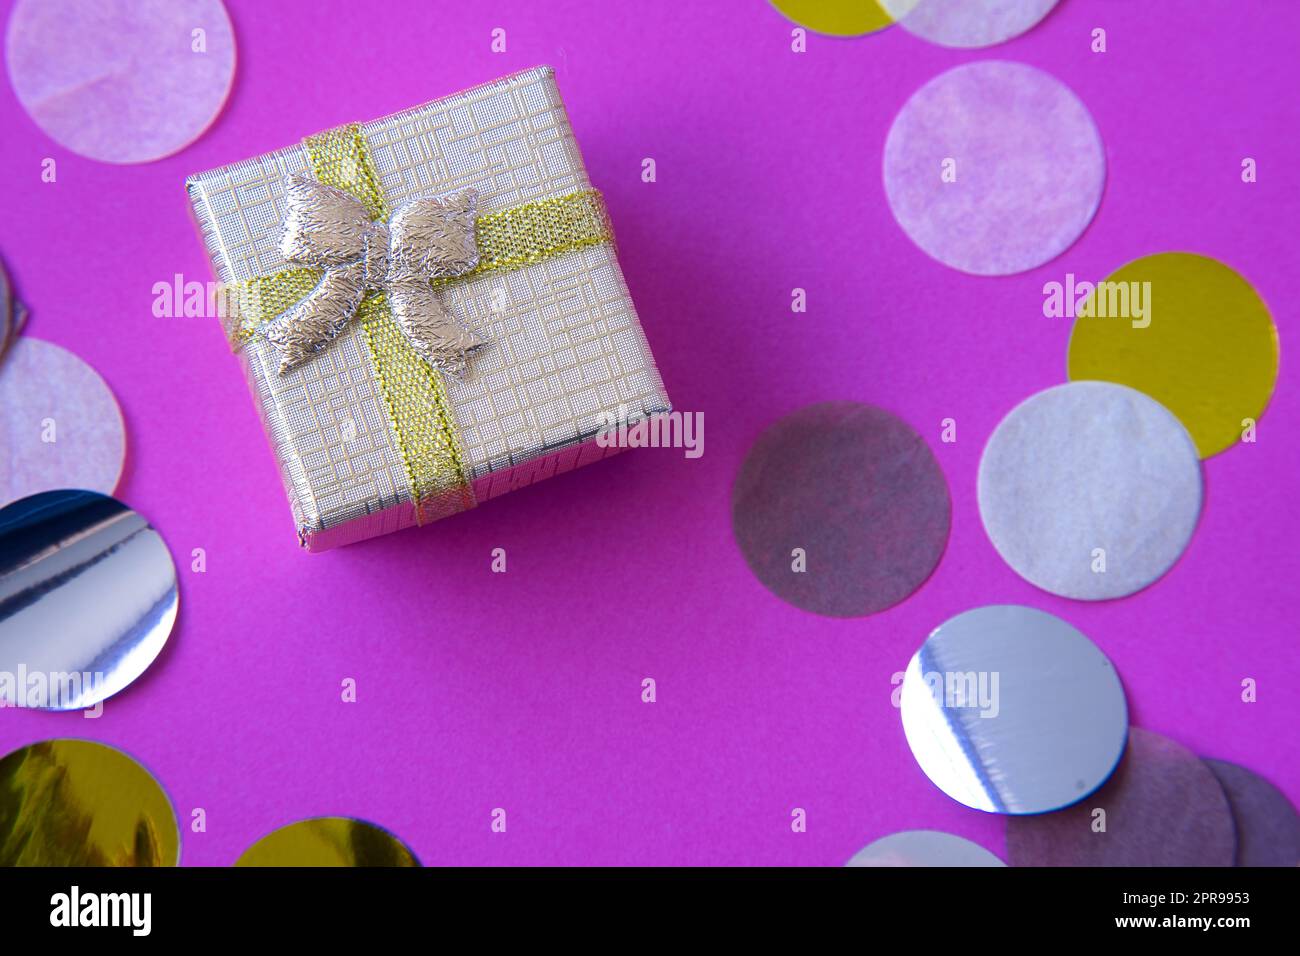 Golden gift box on pink confetti background. Thanksgiving, celebration, romantic. Cheerful and colorful composition to celebrate birthdays or Valentin Stock Photo